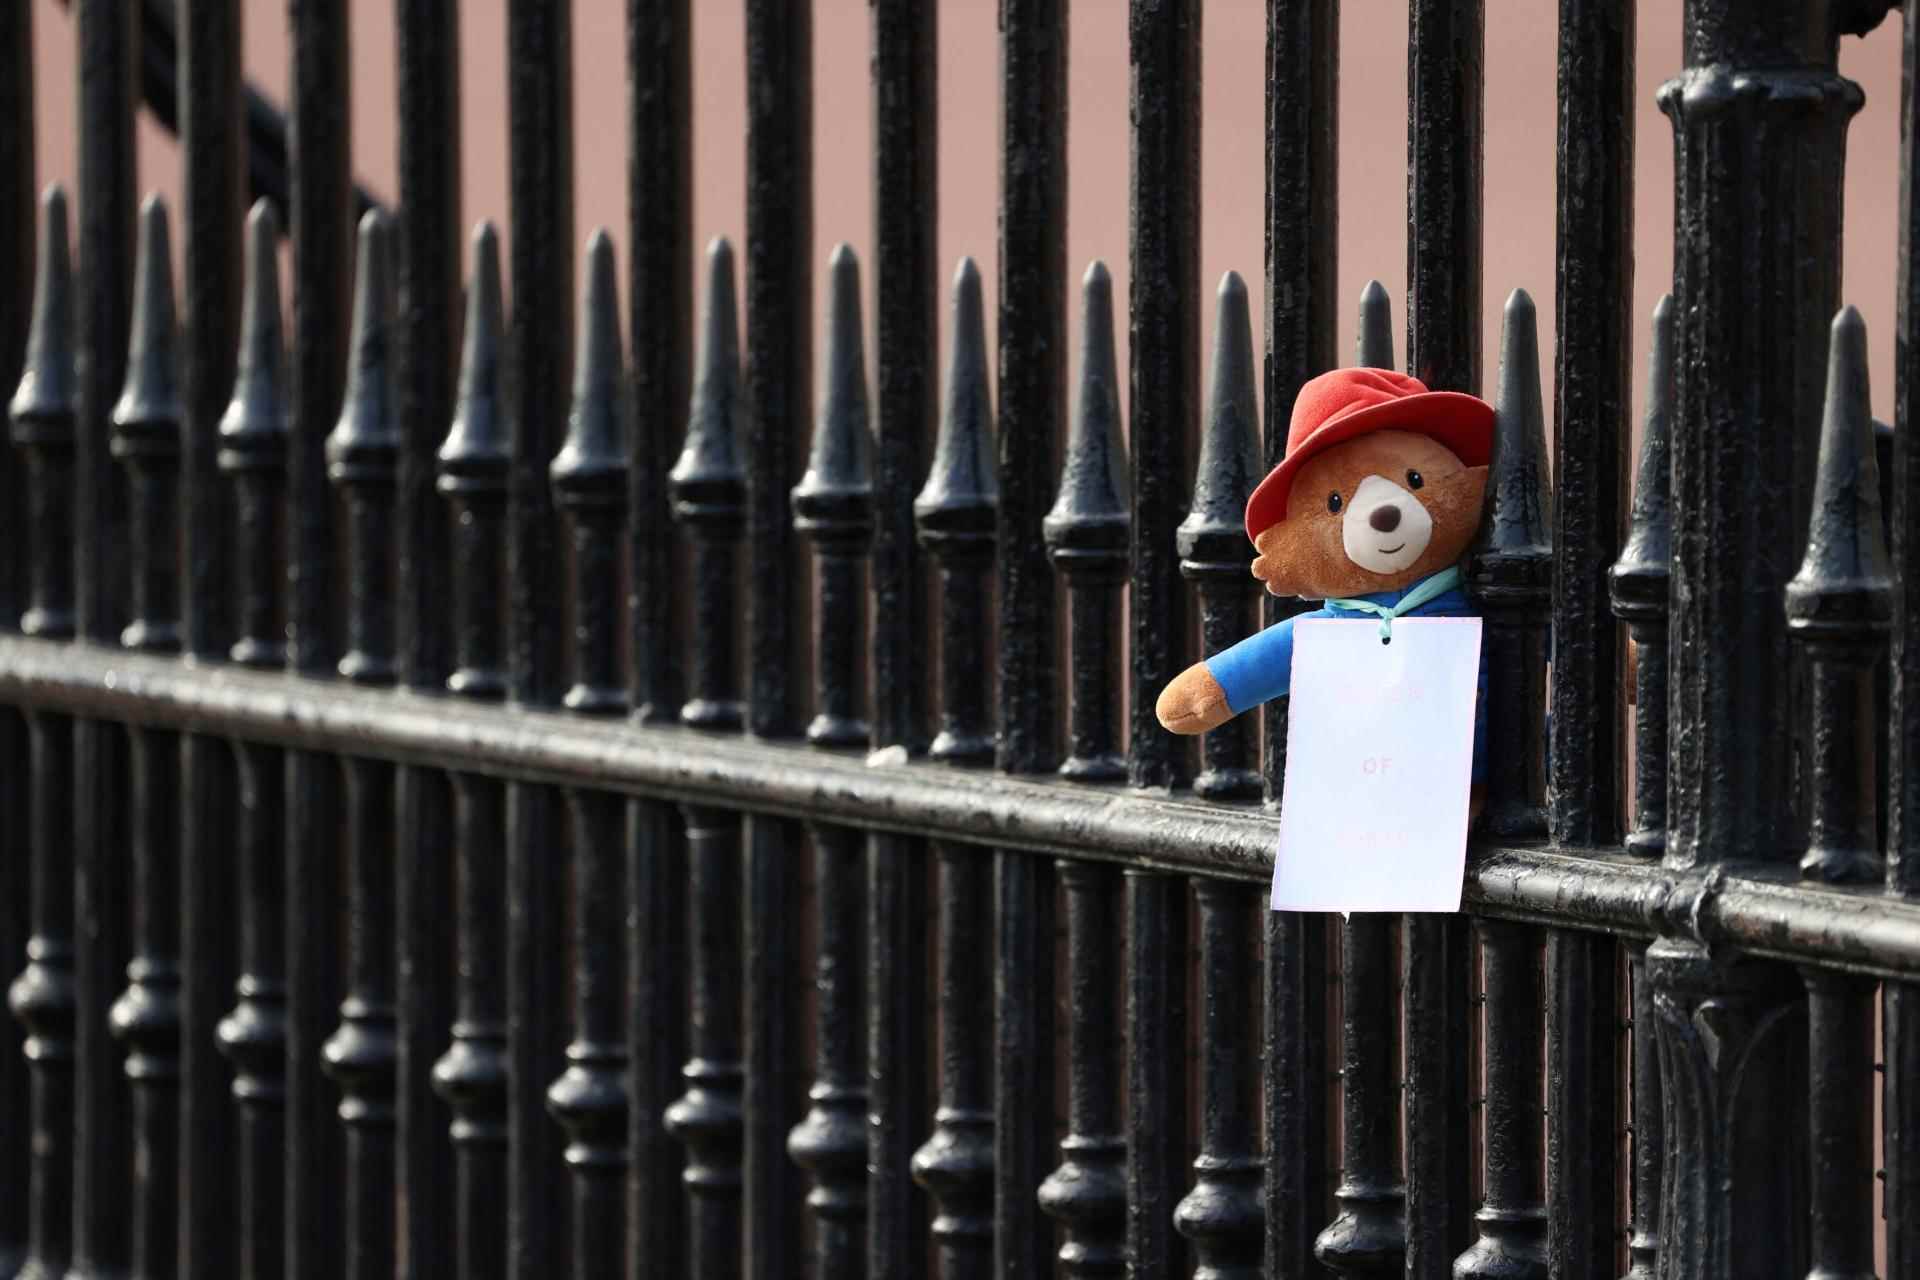 A Paddington teddy bear left outside Buckingham Palace in London on September 10, 2022. Queen Elizabeth II had taken part in a humorous short film with the fictional character on the occasion of the jubilee for her sixty years of reign, in June 2022.